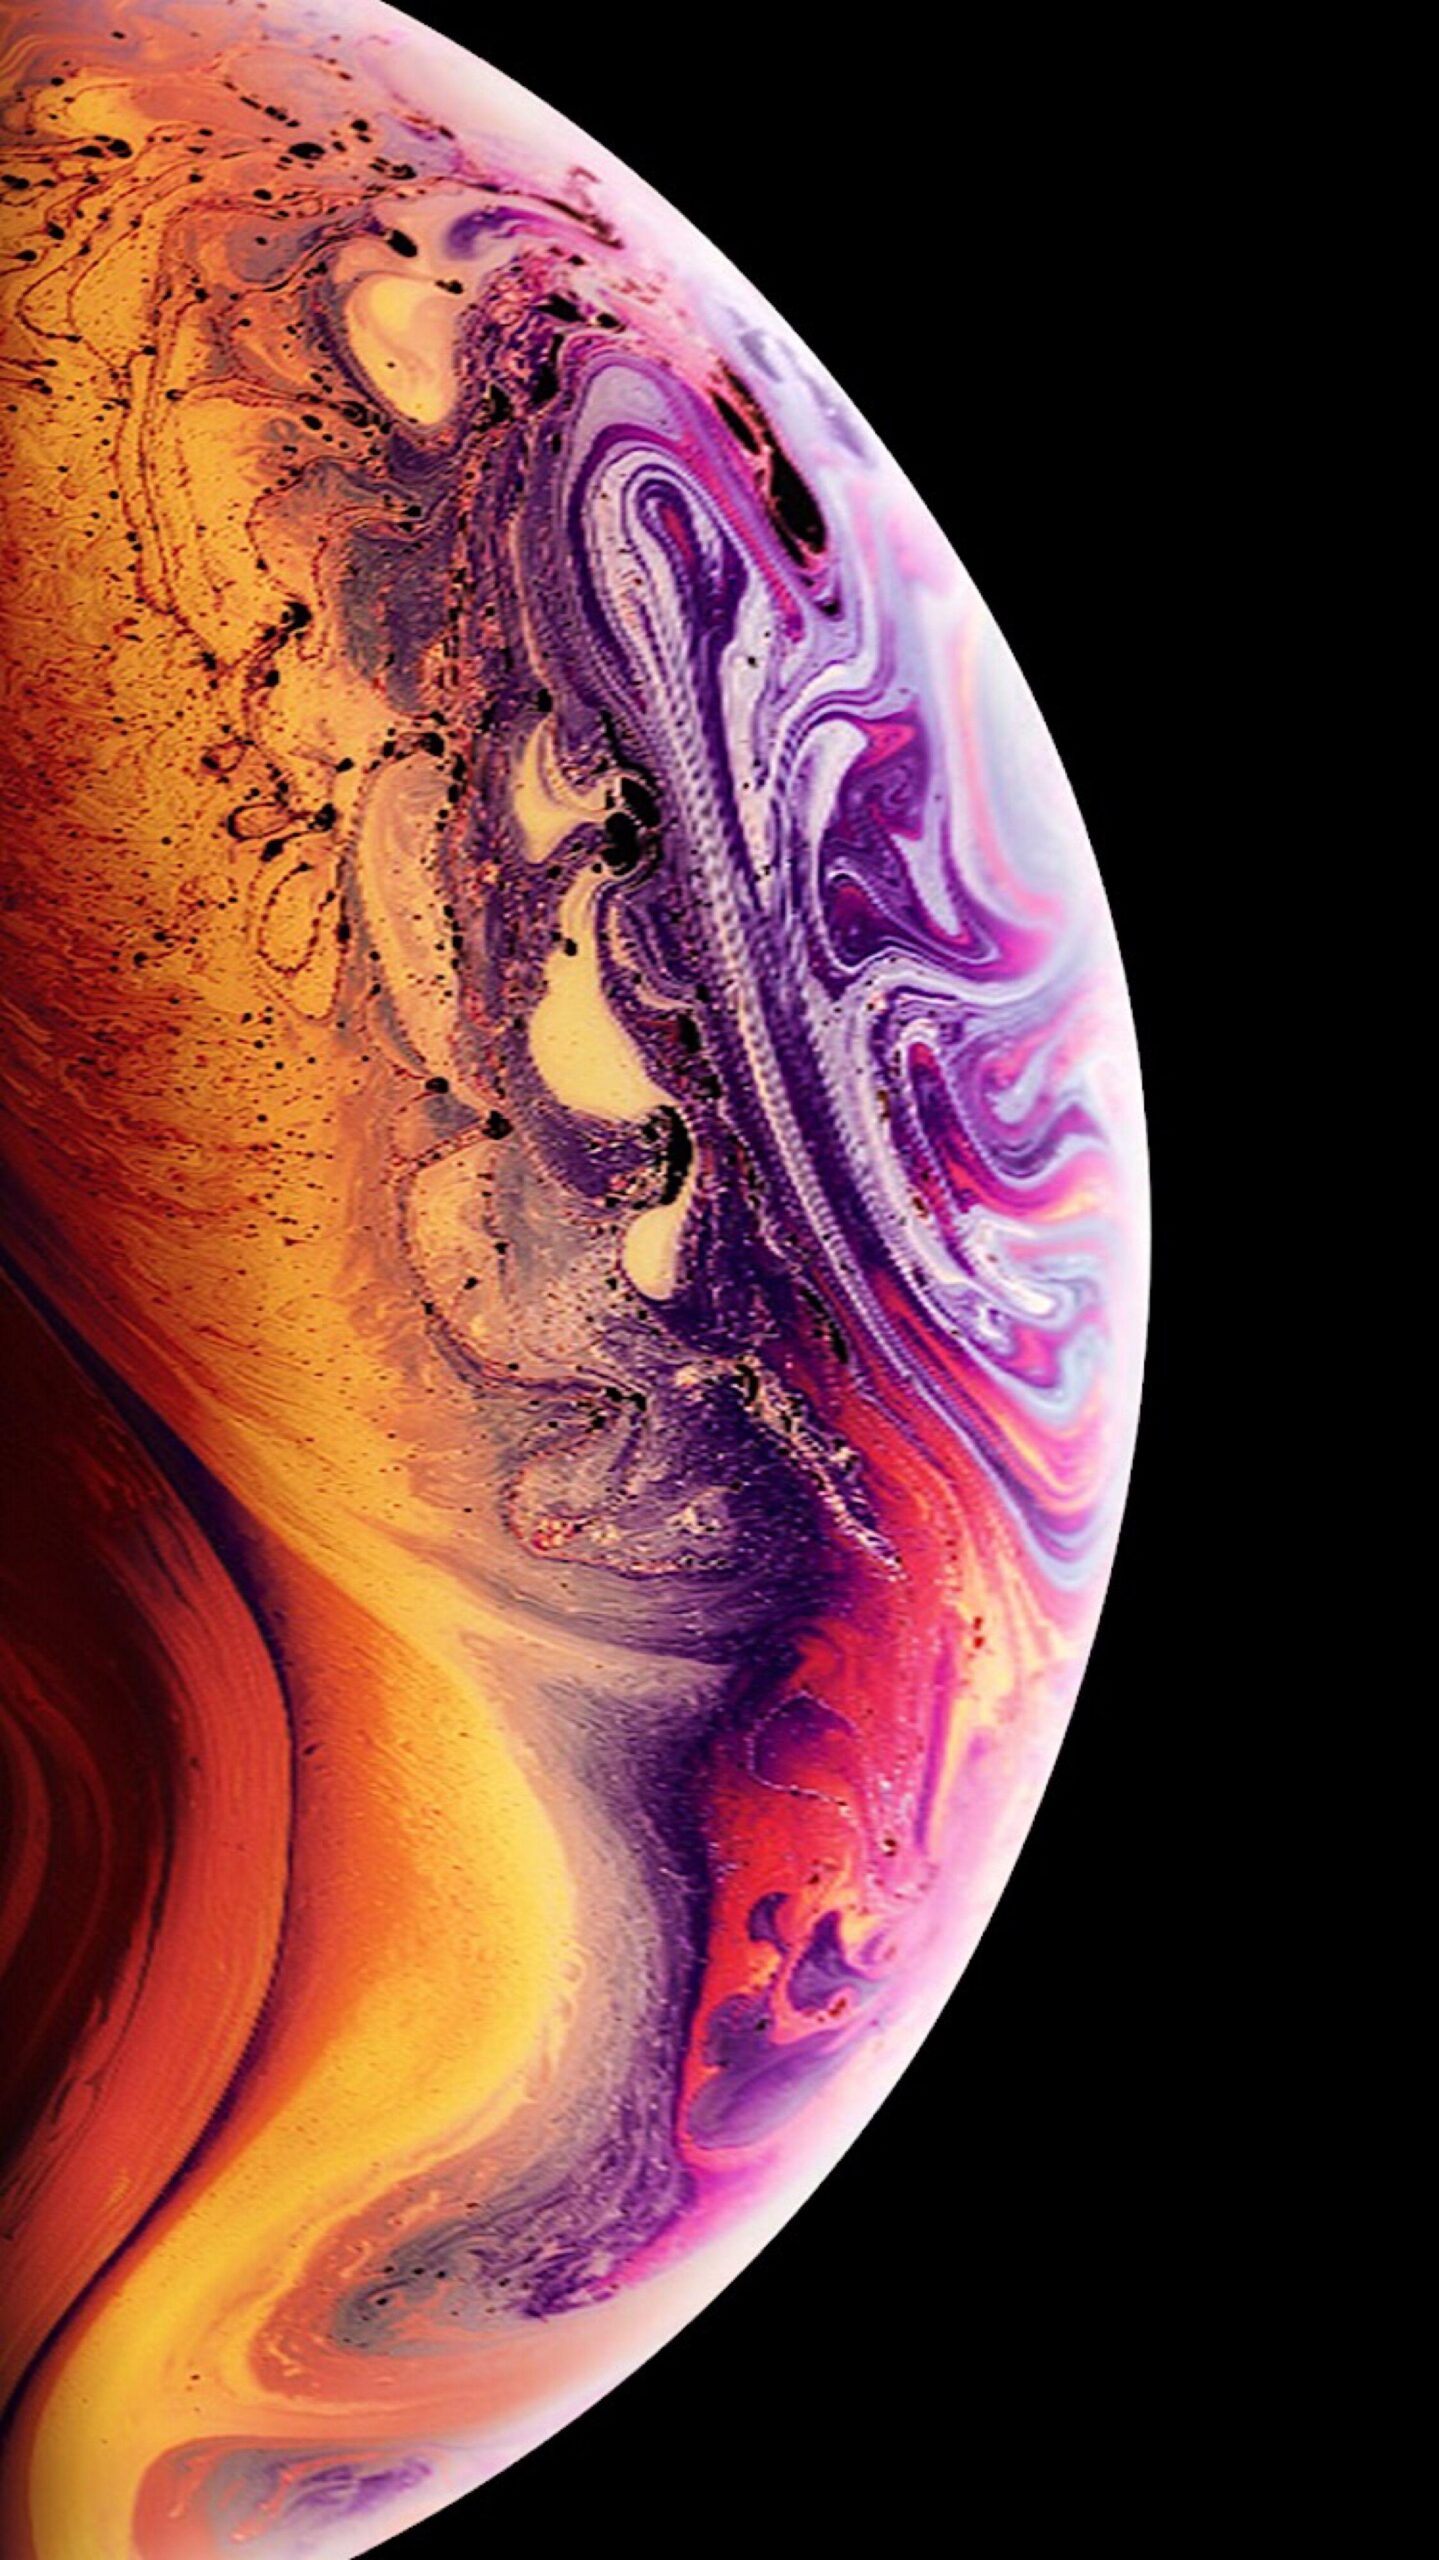 IPhone XS and XS Max Wallpapers in High Quality for Download